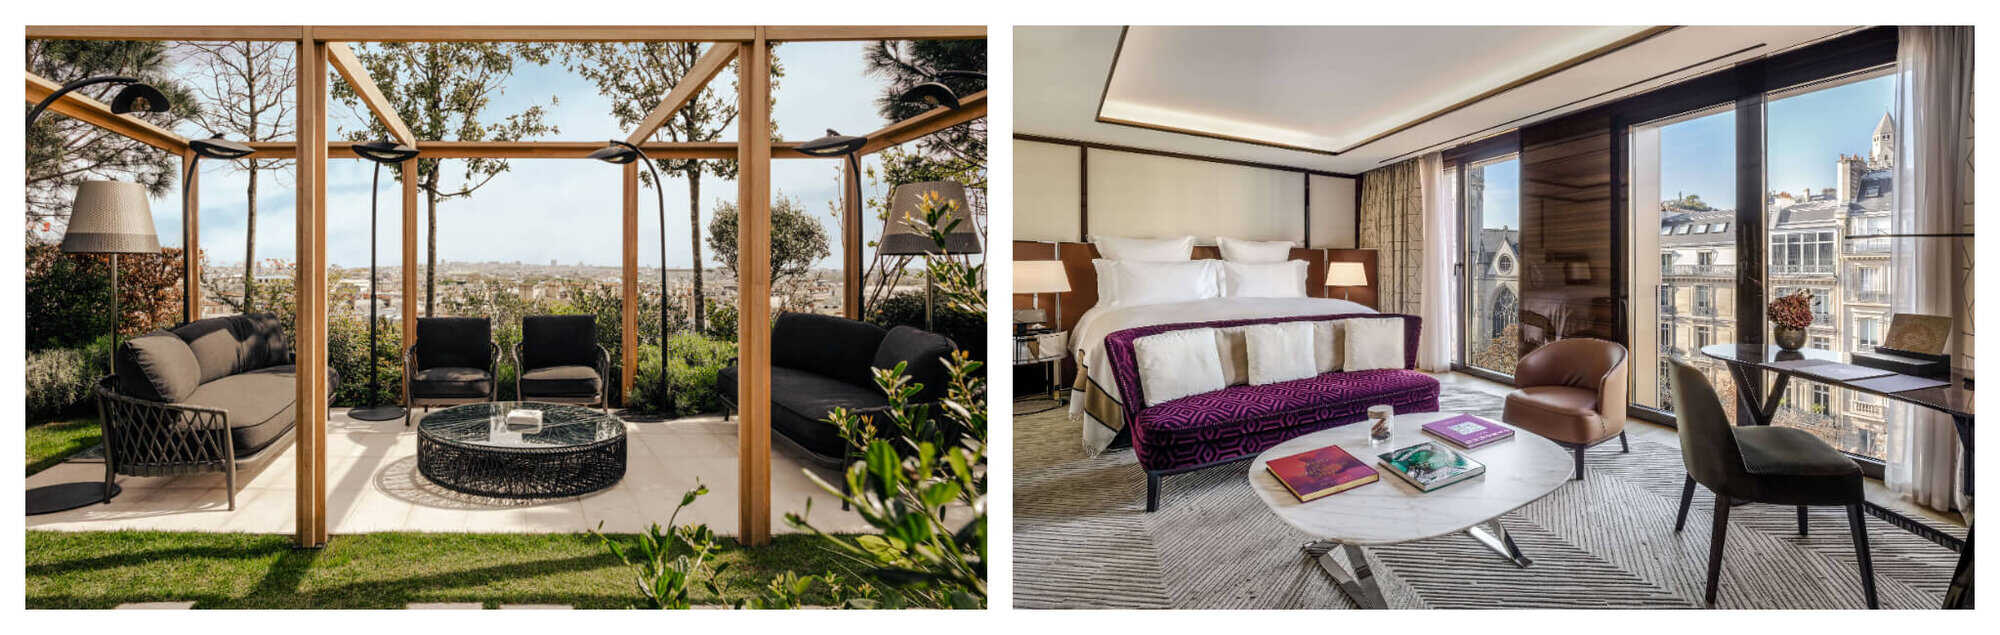 Left: An outdoor patio with wooden frames, brown sofas, white flooring, and green lawn with panoramic views of Paris from the Bulgari hotel. Right: A huge bedroom with white walls, beige carpet floors, and floor-to-ceiling windows with views of Paris.